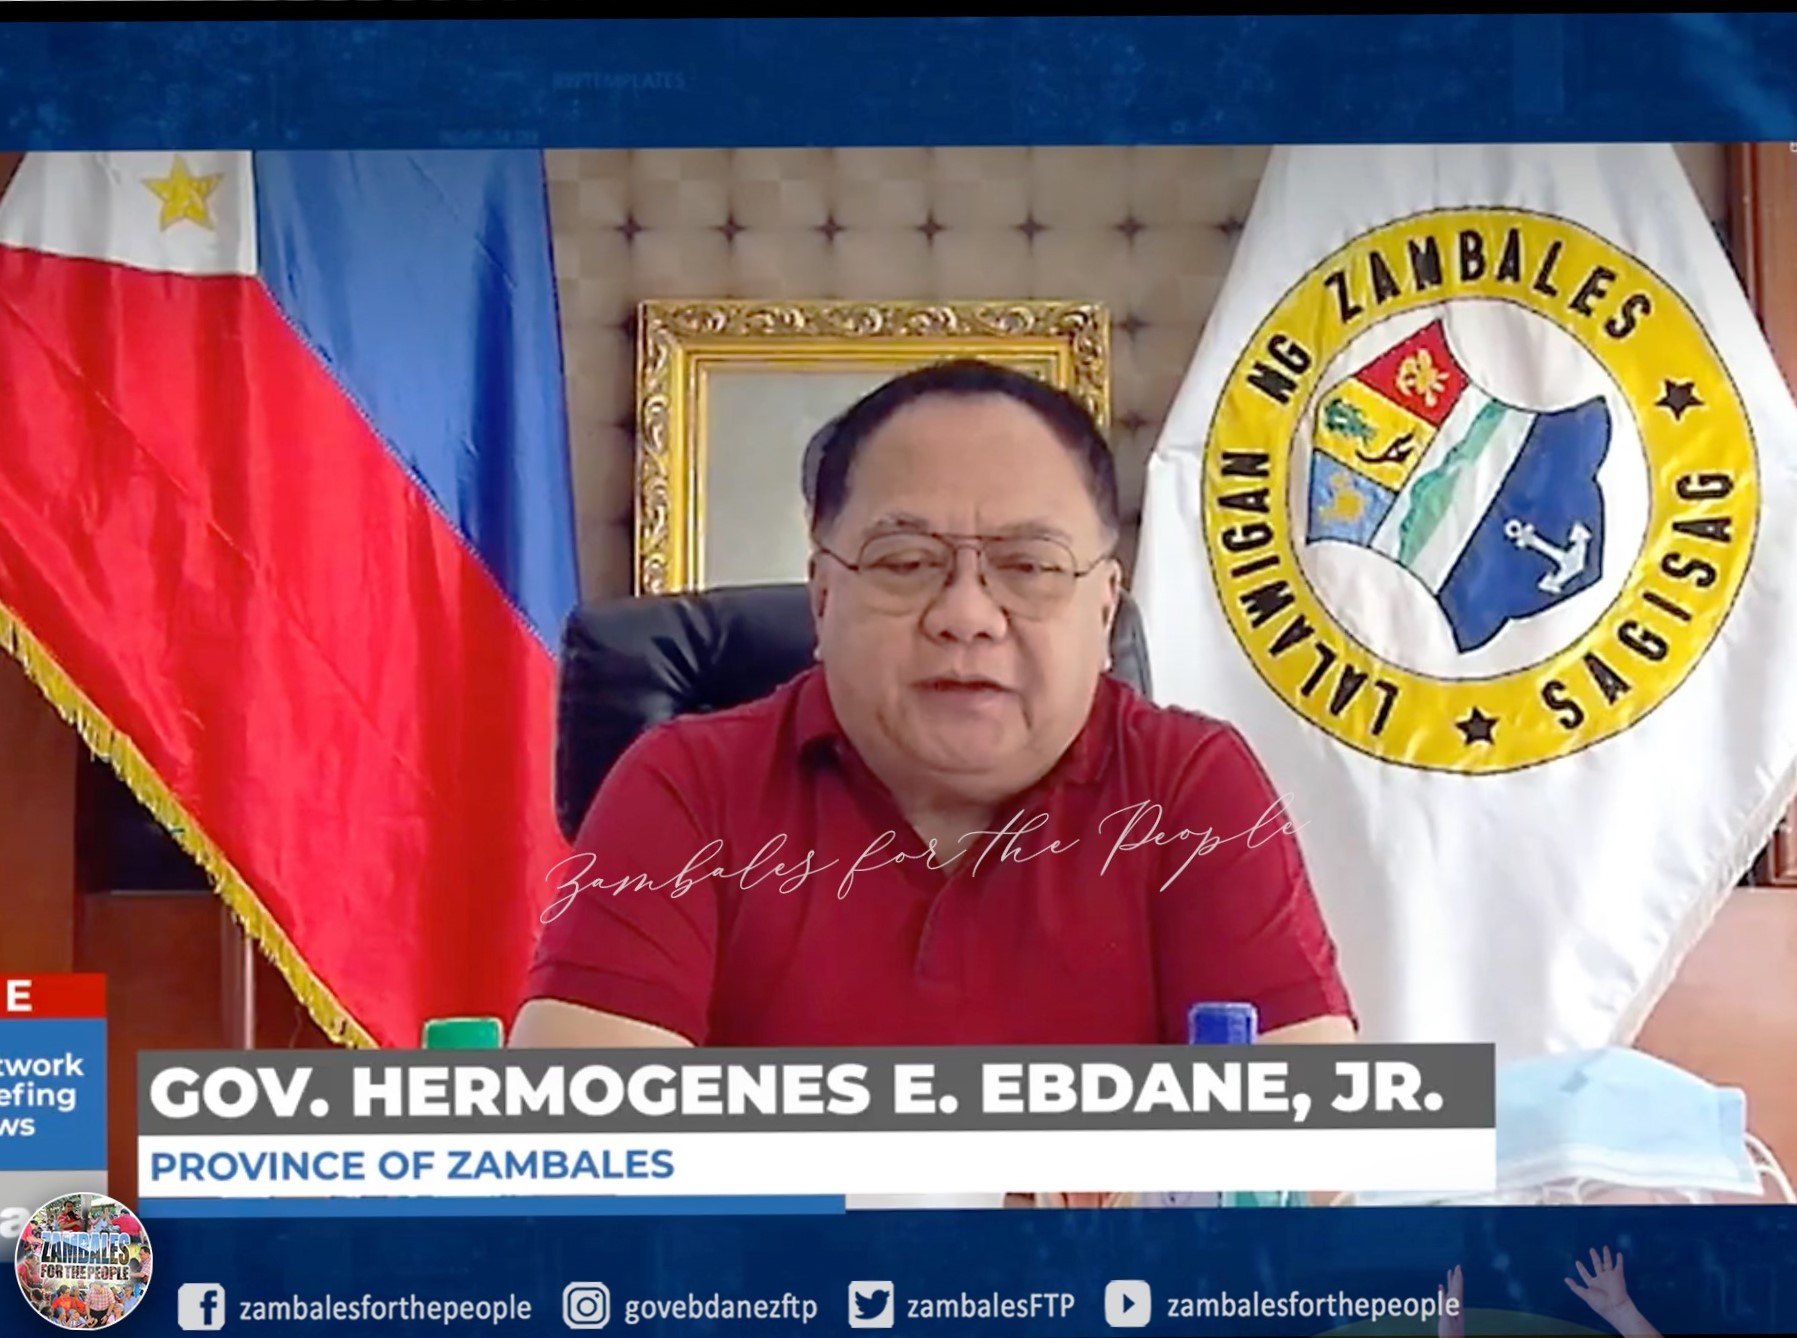 Zambales for the People, Gov. Hermogenes E. Ebdane, Jr. on the cmpaign for 2022 elections